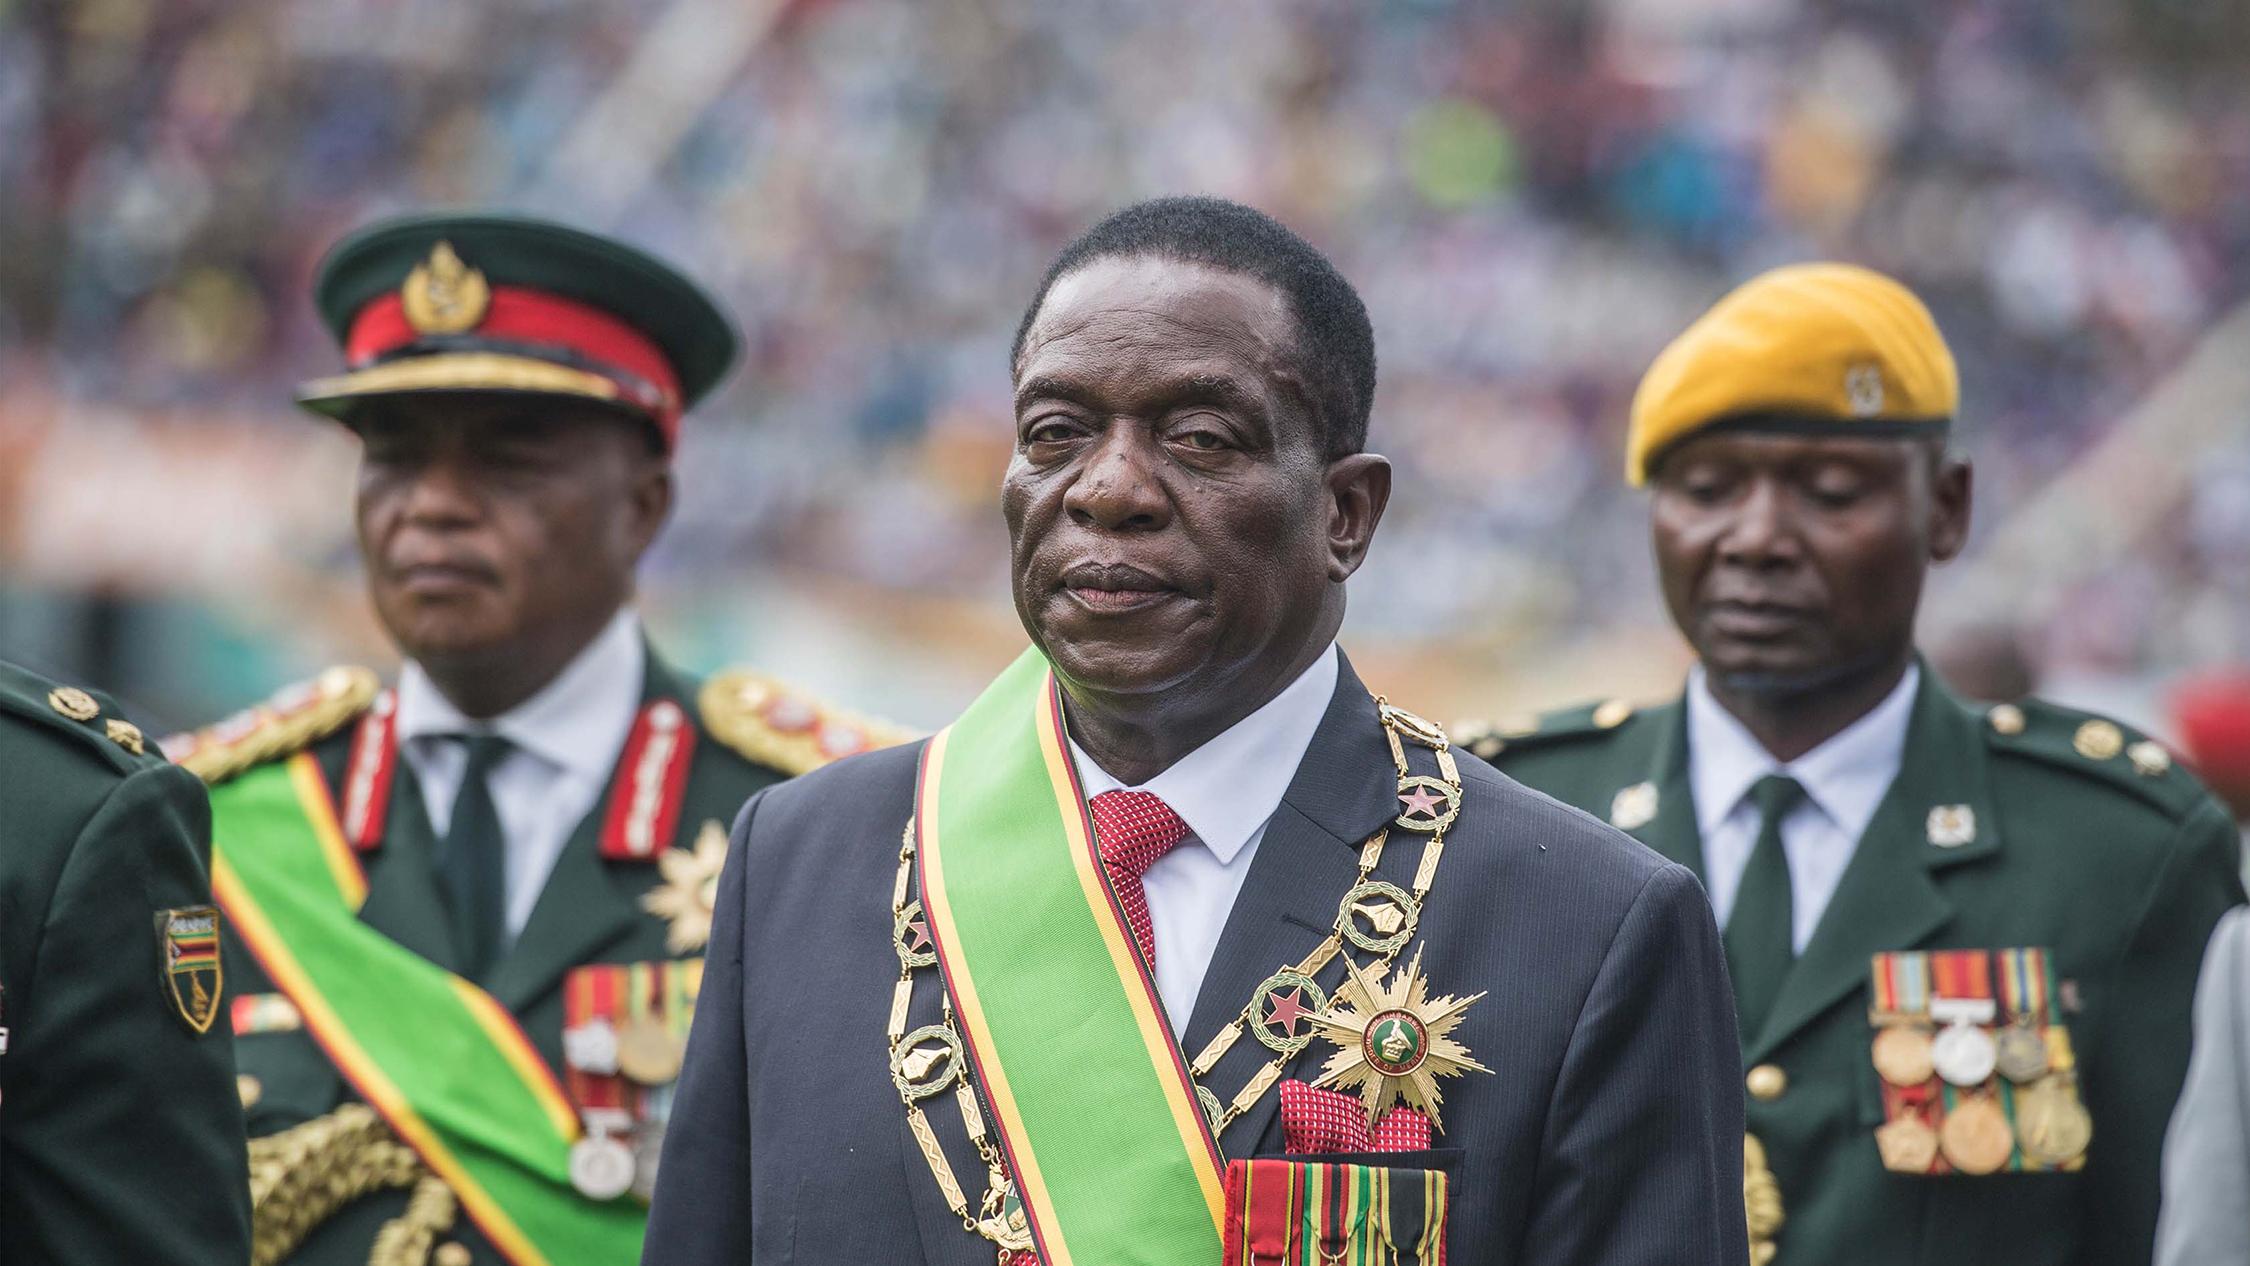 Civil groups accuse President Emmerson Mnangagwa of using ’murder of unarmed civilians as a tool to retain power’